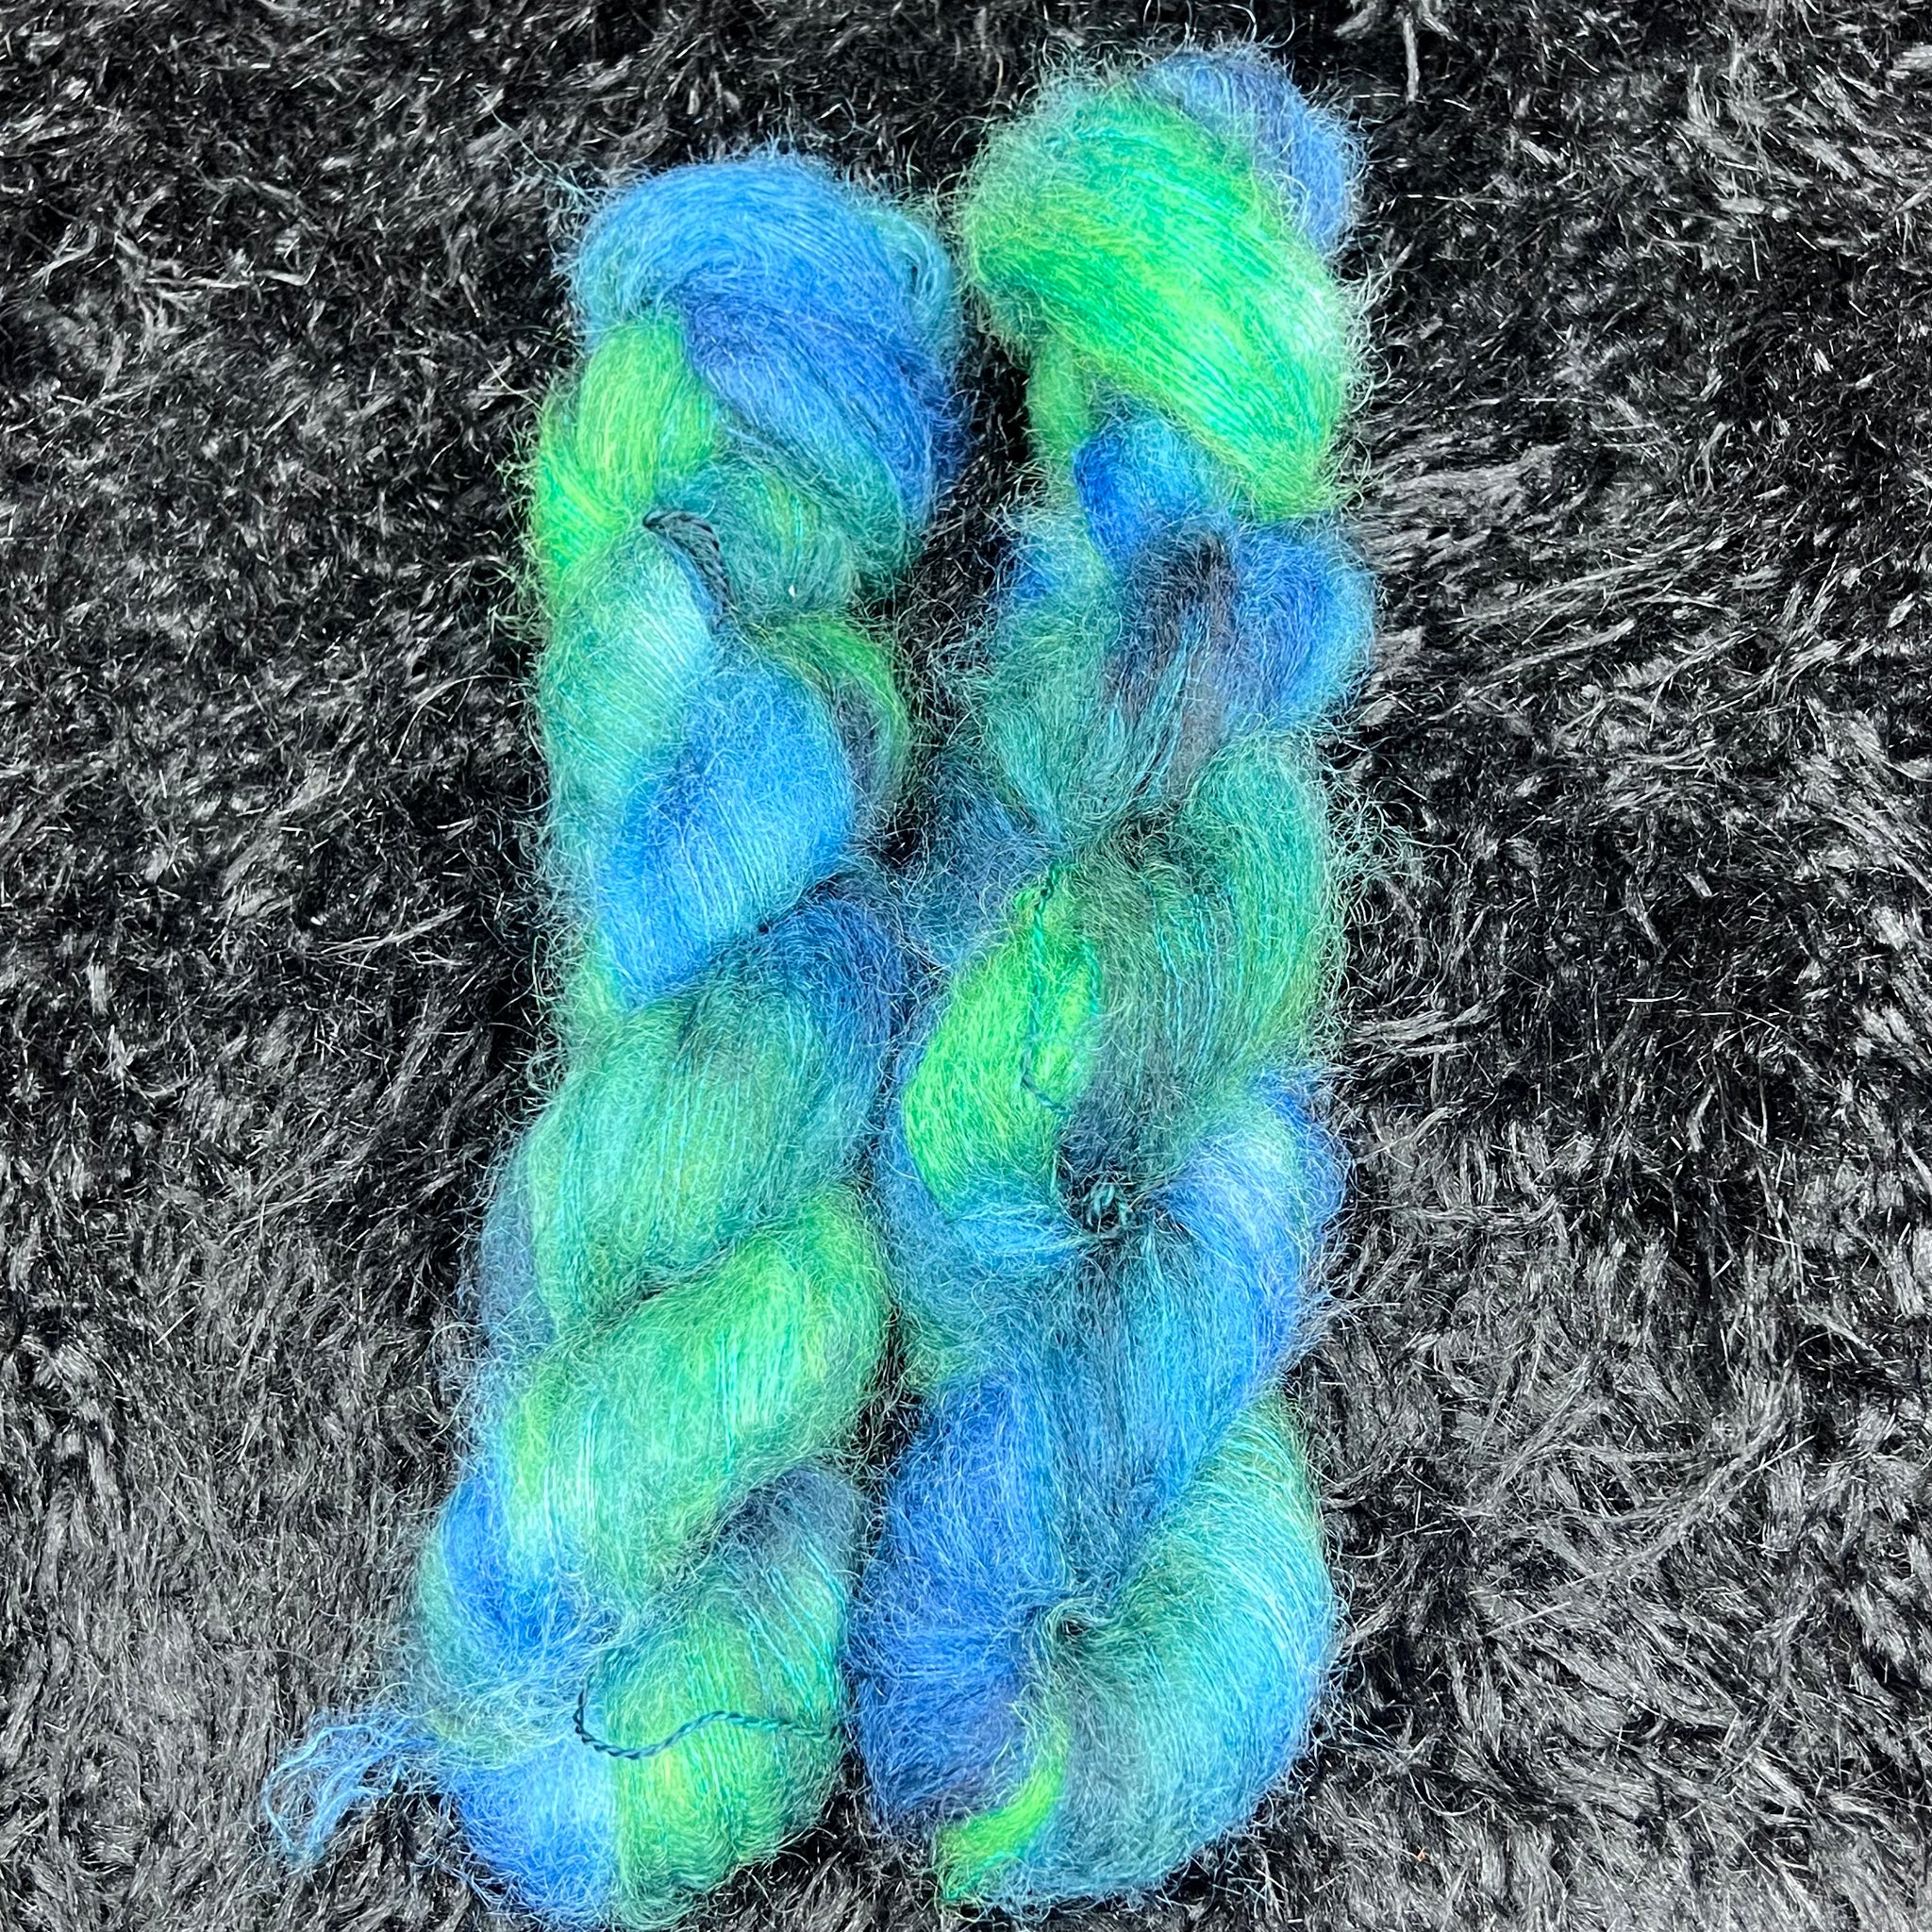 Vivienne Slub Fingering  & Abigail Mohair Lace matching sets (skeins available individually)-  The Riches